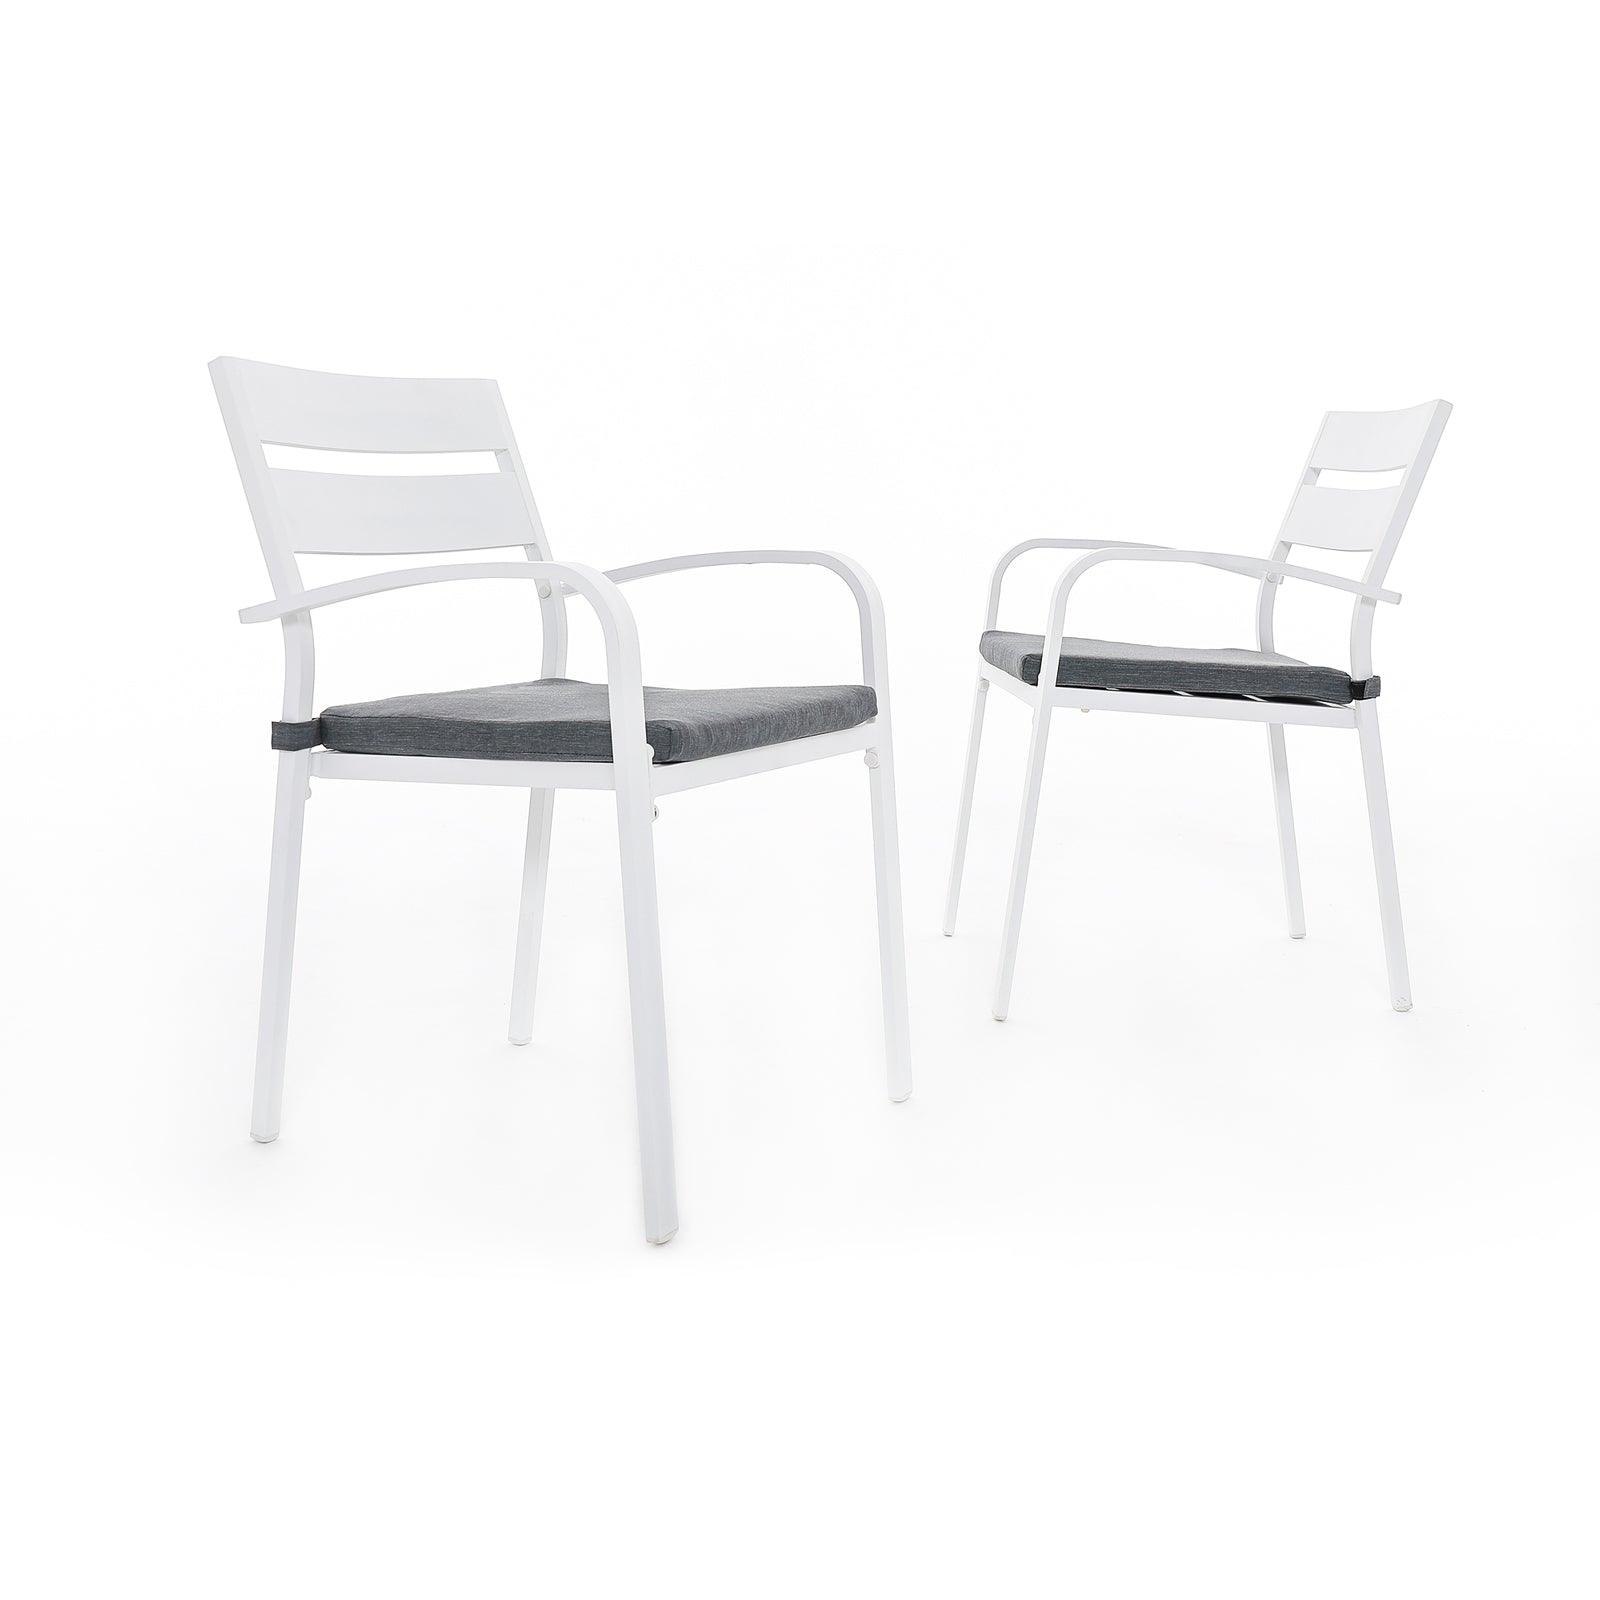 Salina 2 piece white outdoor Stackable Metal Dining Chairs, grey cushions - Jardina Furniture#color_White